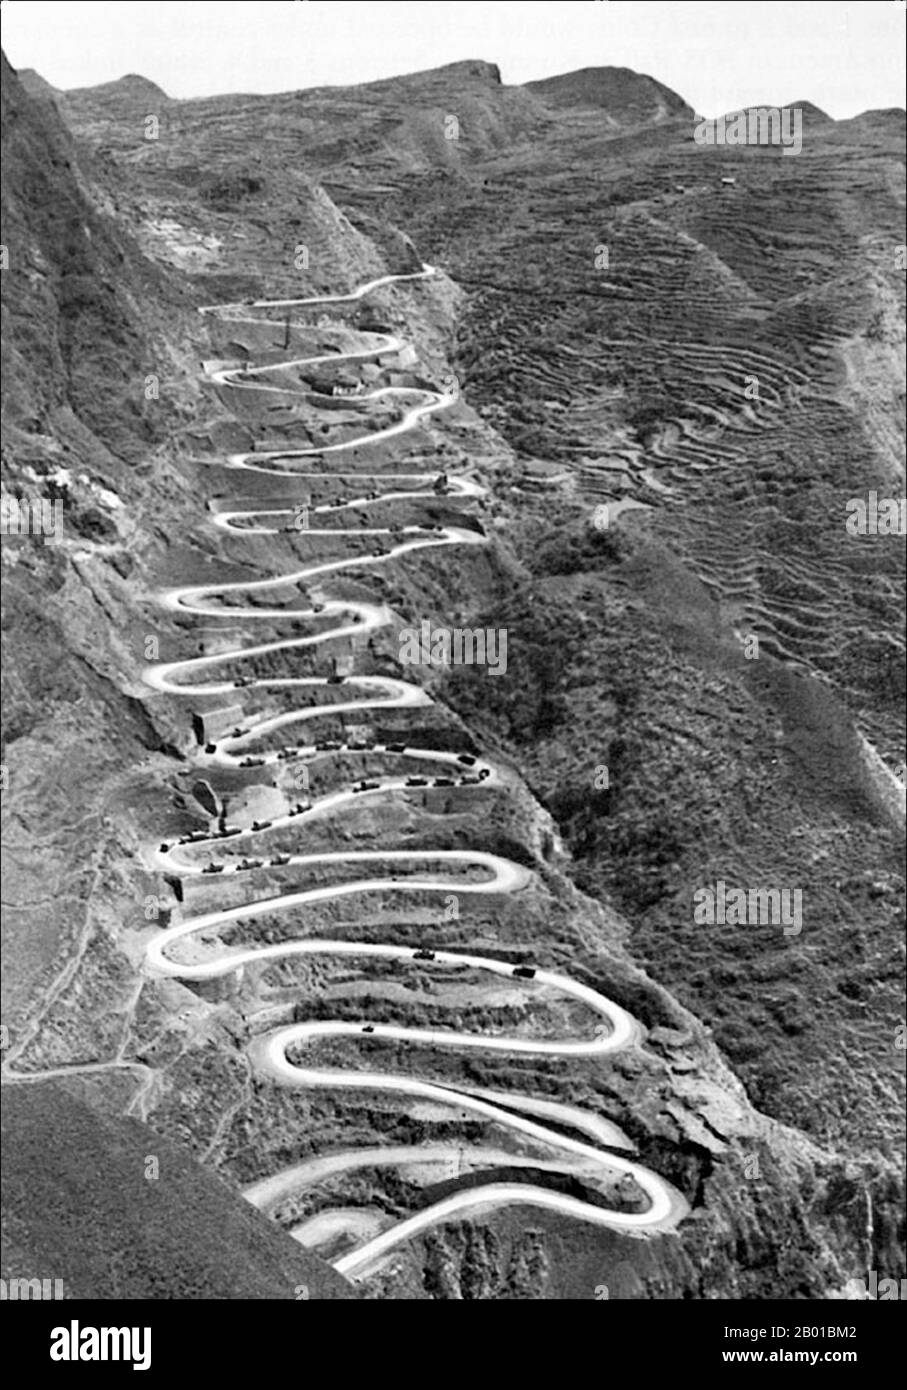 Burma/Myanmar/China: A convoy of military trucks on a section of the Burma Road, c. 1945.  The Burma Road is a road linking Burma (also called Myanmar) with China. Its terminals are Kunming, Yunnan, and Lashio, Burma. When it was built, Burma was a British colony under Japanese occupation.  The road is 717 miles (1,154 km) long and runs through rough mountain country. The sections from Kunming to the Burmese border were built by 200,000 Chinese laborers during the Second Sino-Japanese War in 1937 and completed by 1938. It had a role in World War II, when the British used the Burma Road. Stock Photo